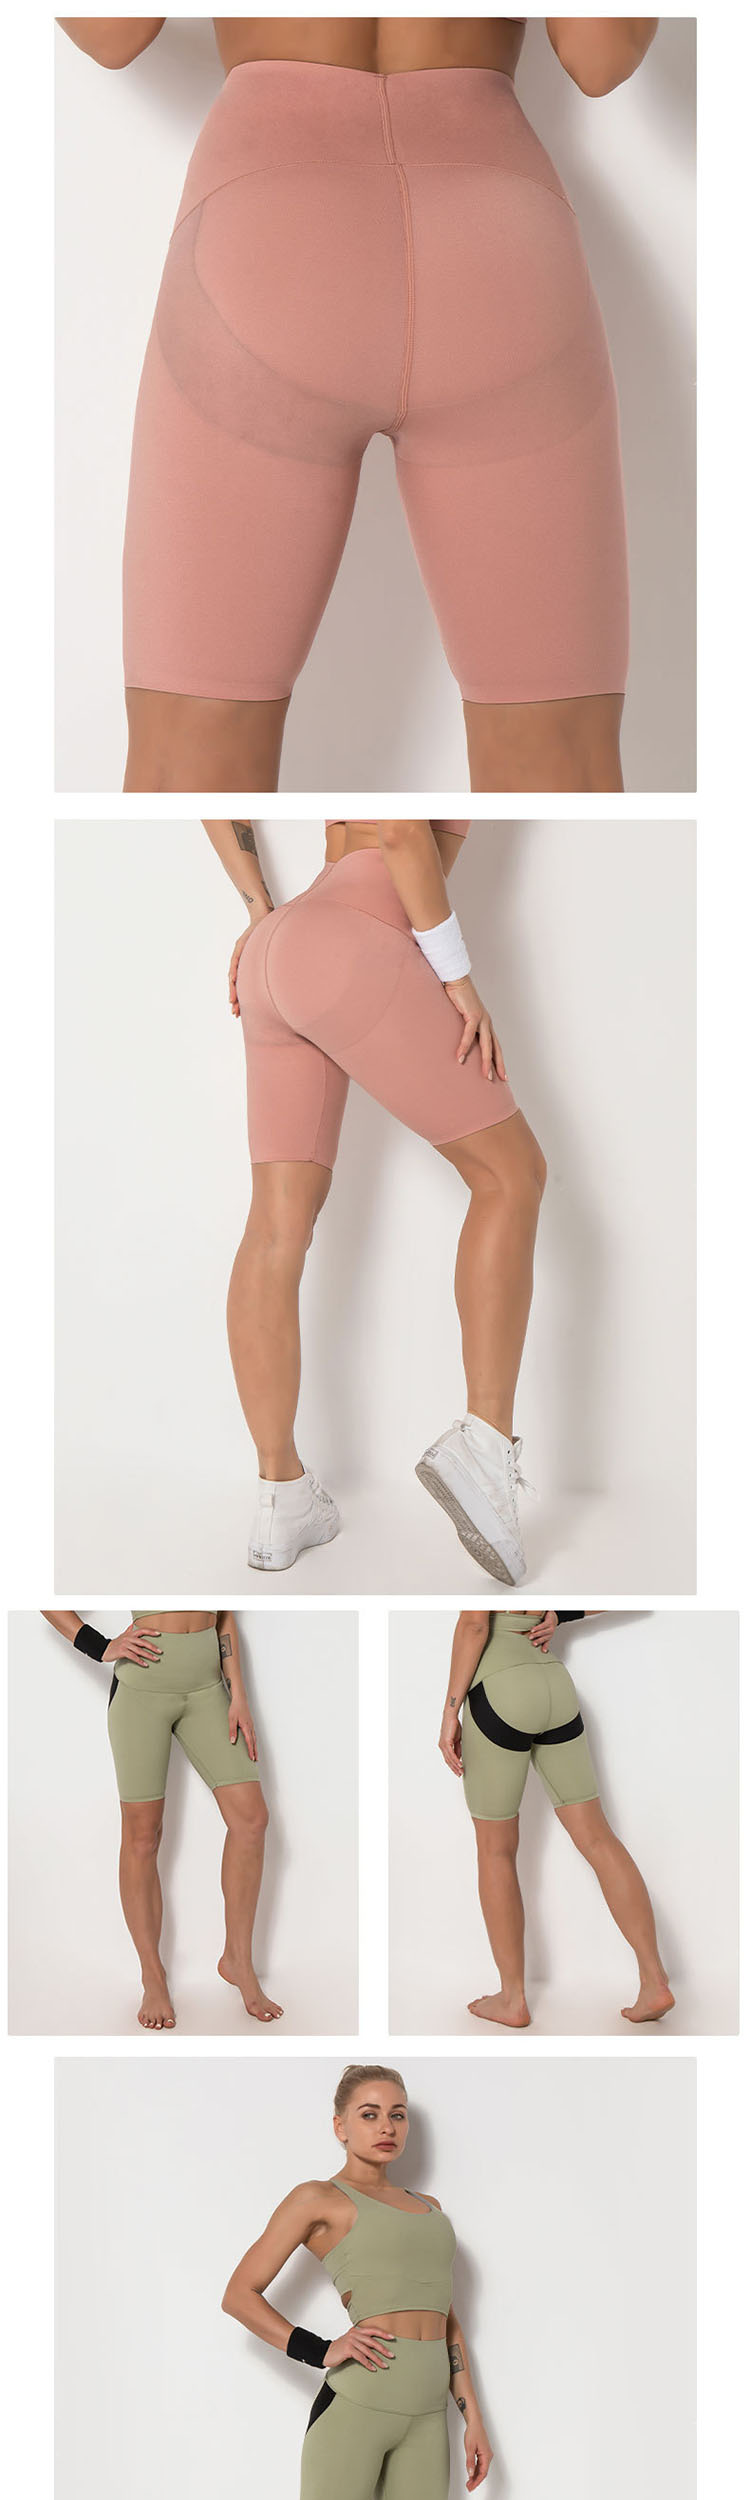 Tightly wrap the buttocks and thighs, safely protect the sports muscles, and fit comfortably.